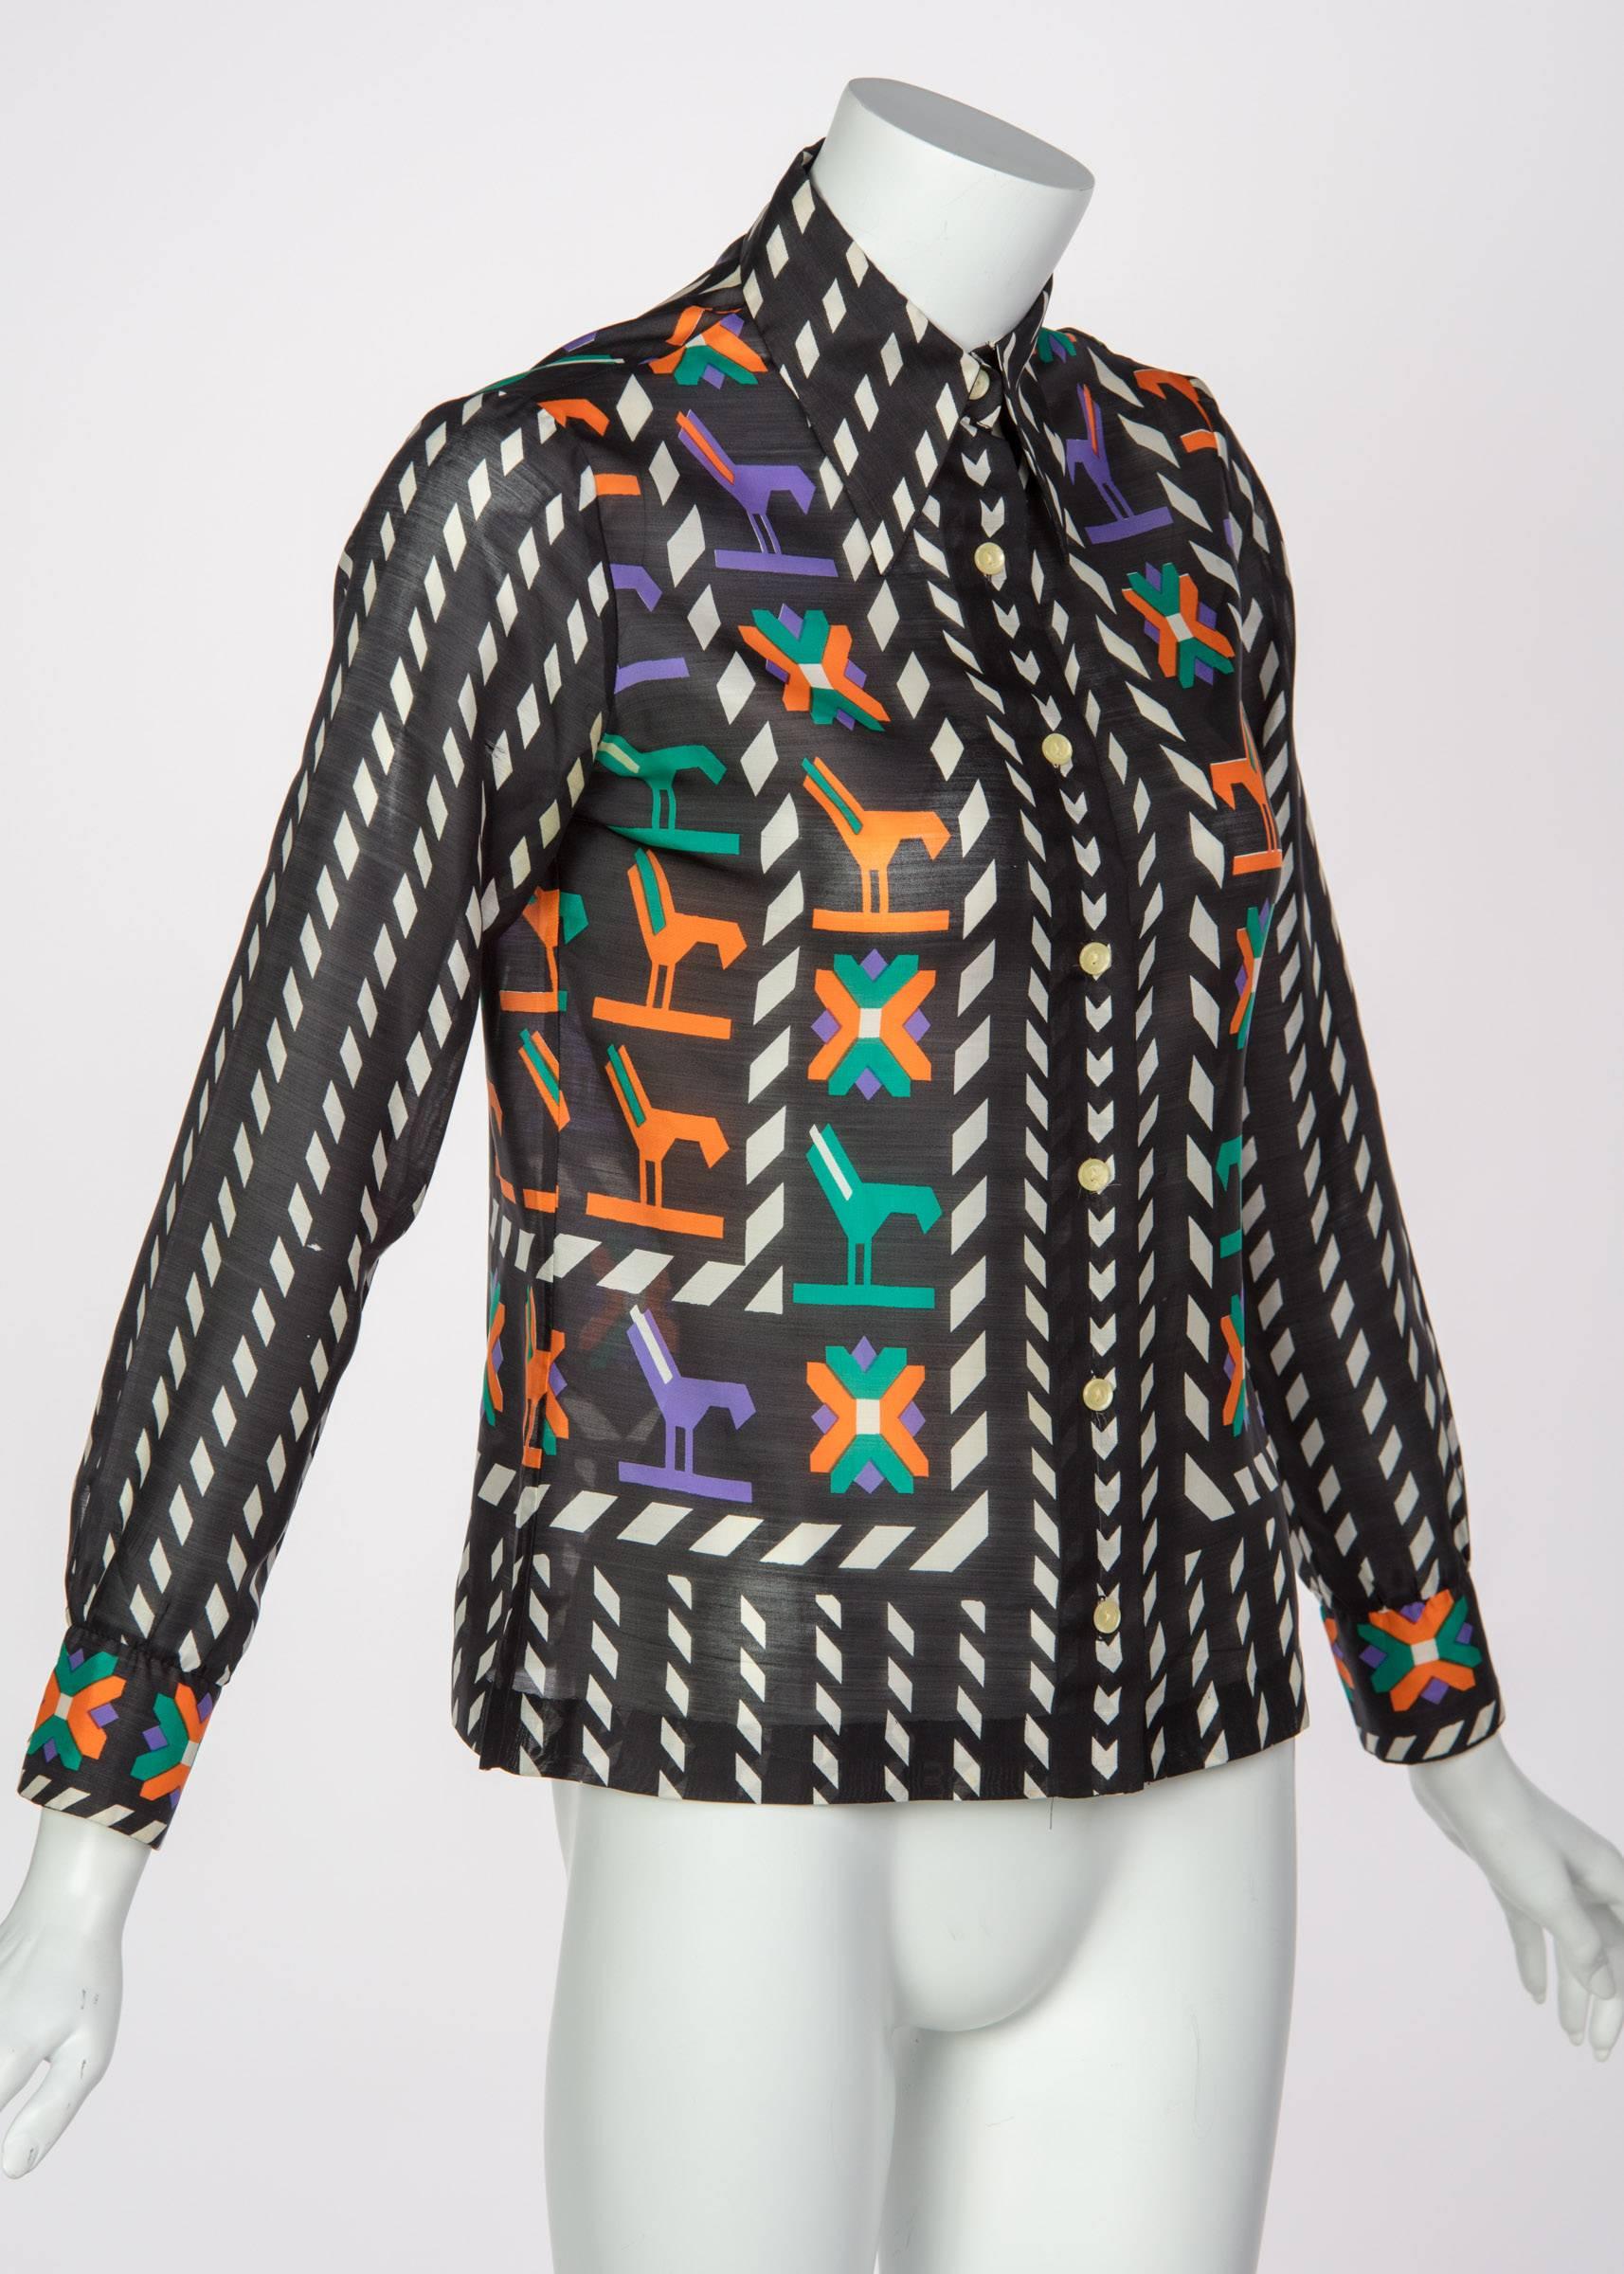 Lanvin white, orange, purple and green print blouse done in 100% silk. 
Excellent condition. Professionally cleaned and pressed.

Size estimate: XS/S
Measurements: 
Shoulders: 15 inches
Sleeves: 21.5 inches
Bust: 36 inches
Waist: 30 inches
Length: